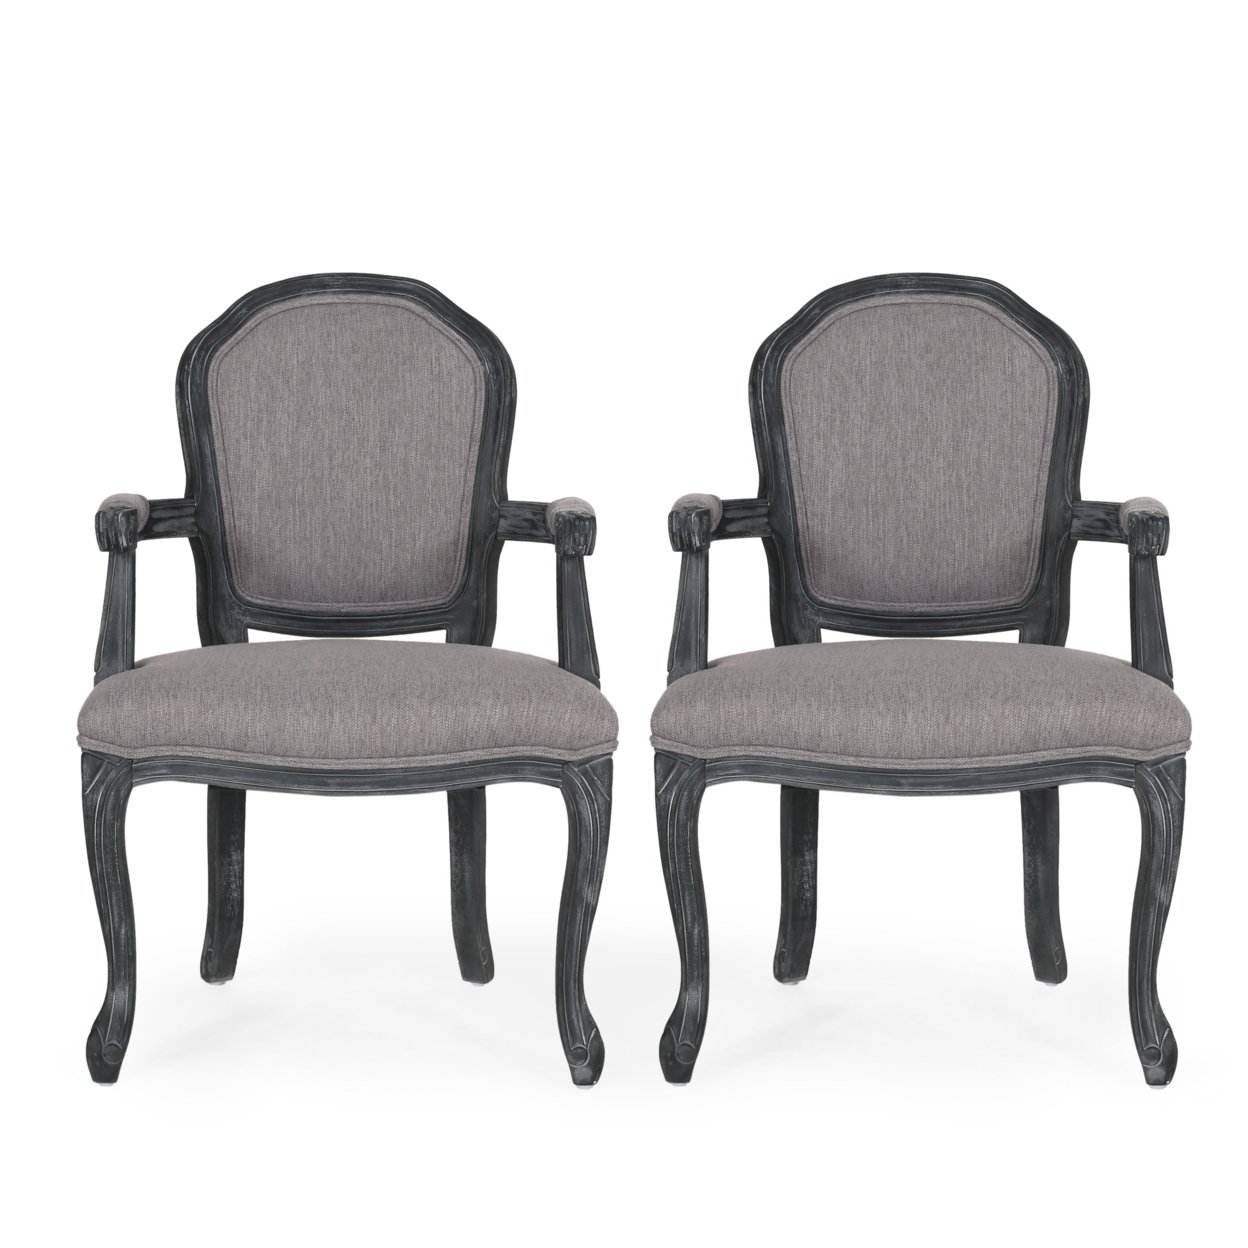 Fairgreens Traditional Upholstered Dining Chairs, Set Of 2 - Grey